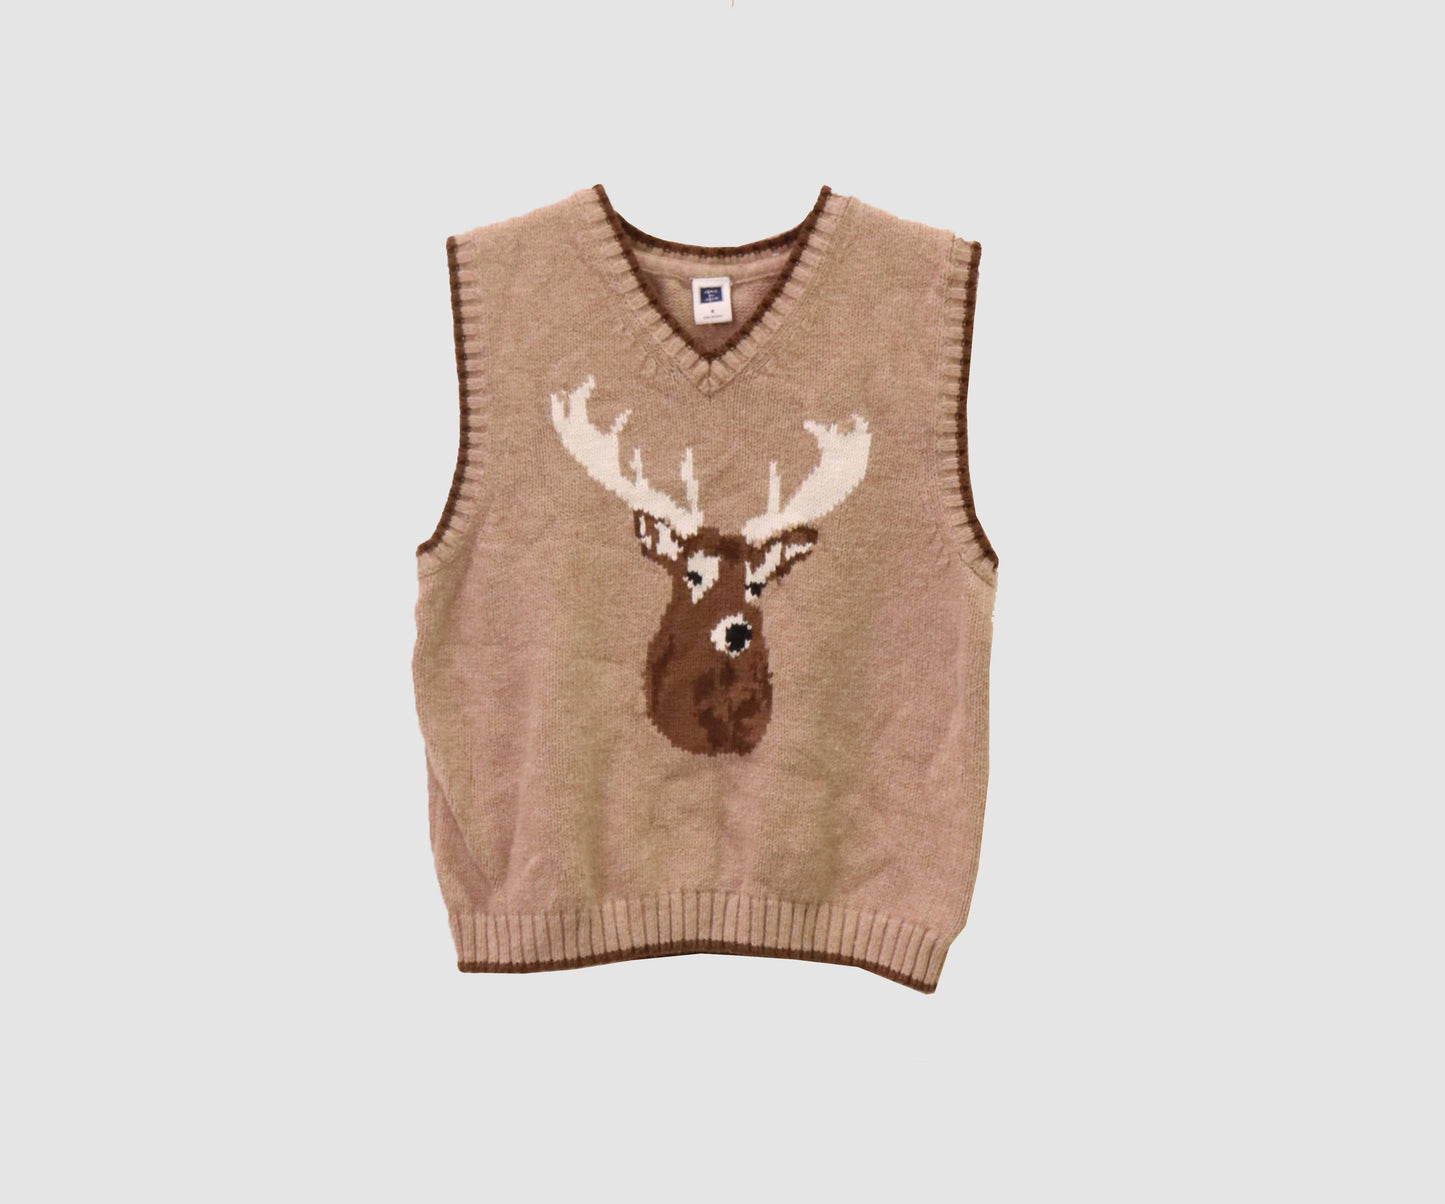 JANIE AND JACK Apparel 4 Years / Brown Sweater Vest